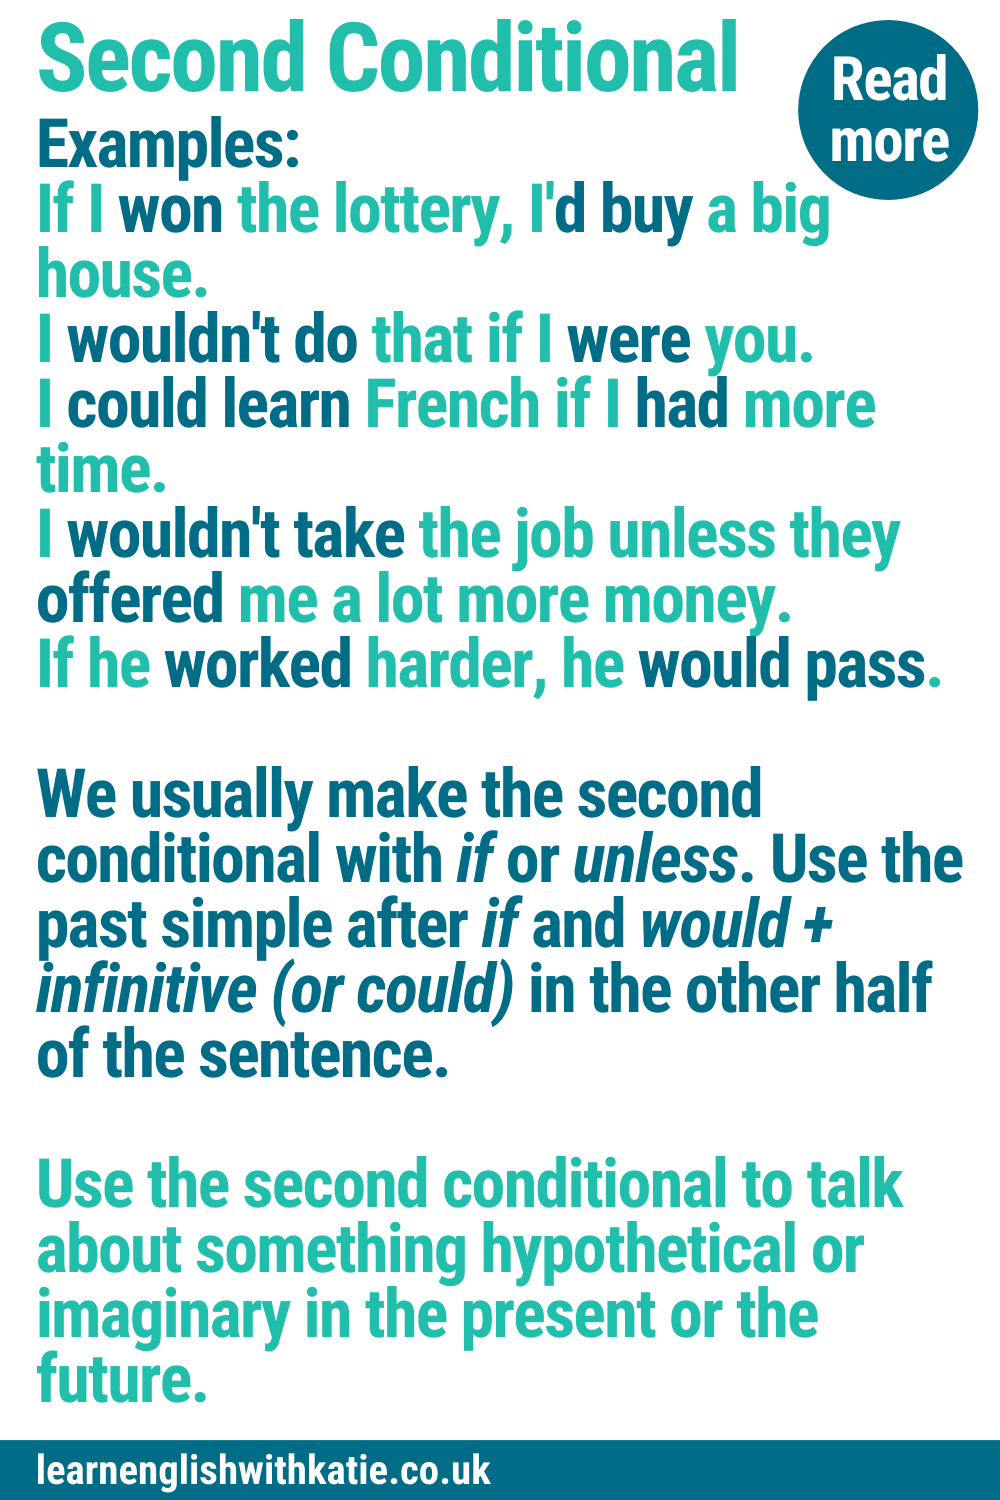 Pinnable infographic summarising the second conditional